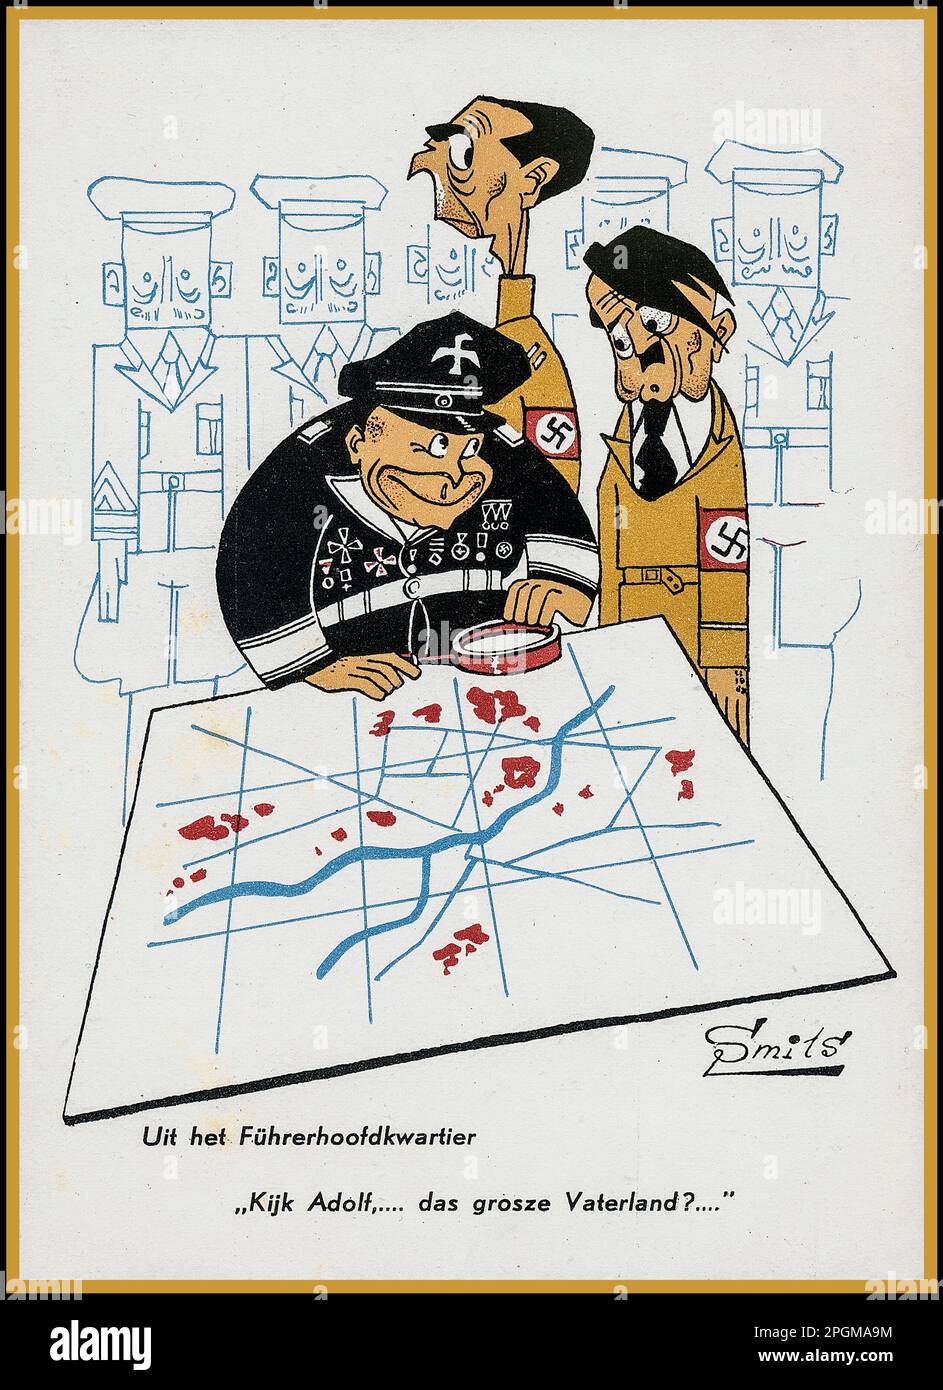 1940s Adolf Hitler, Joseph Goebbels and Hermann Goering as Nazi caricature cartoons, mocking Hitlers greater Germany plans... WW2 World War II Second World War   ' From the Fuhrers headquarters.. Look Adolf, the Greater Fatherland' By artist Smits World War II Second World War Stock Photo